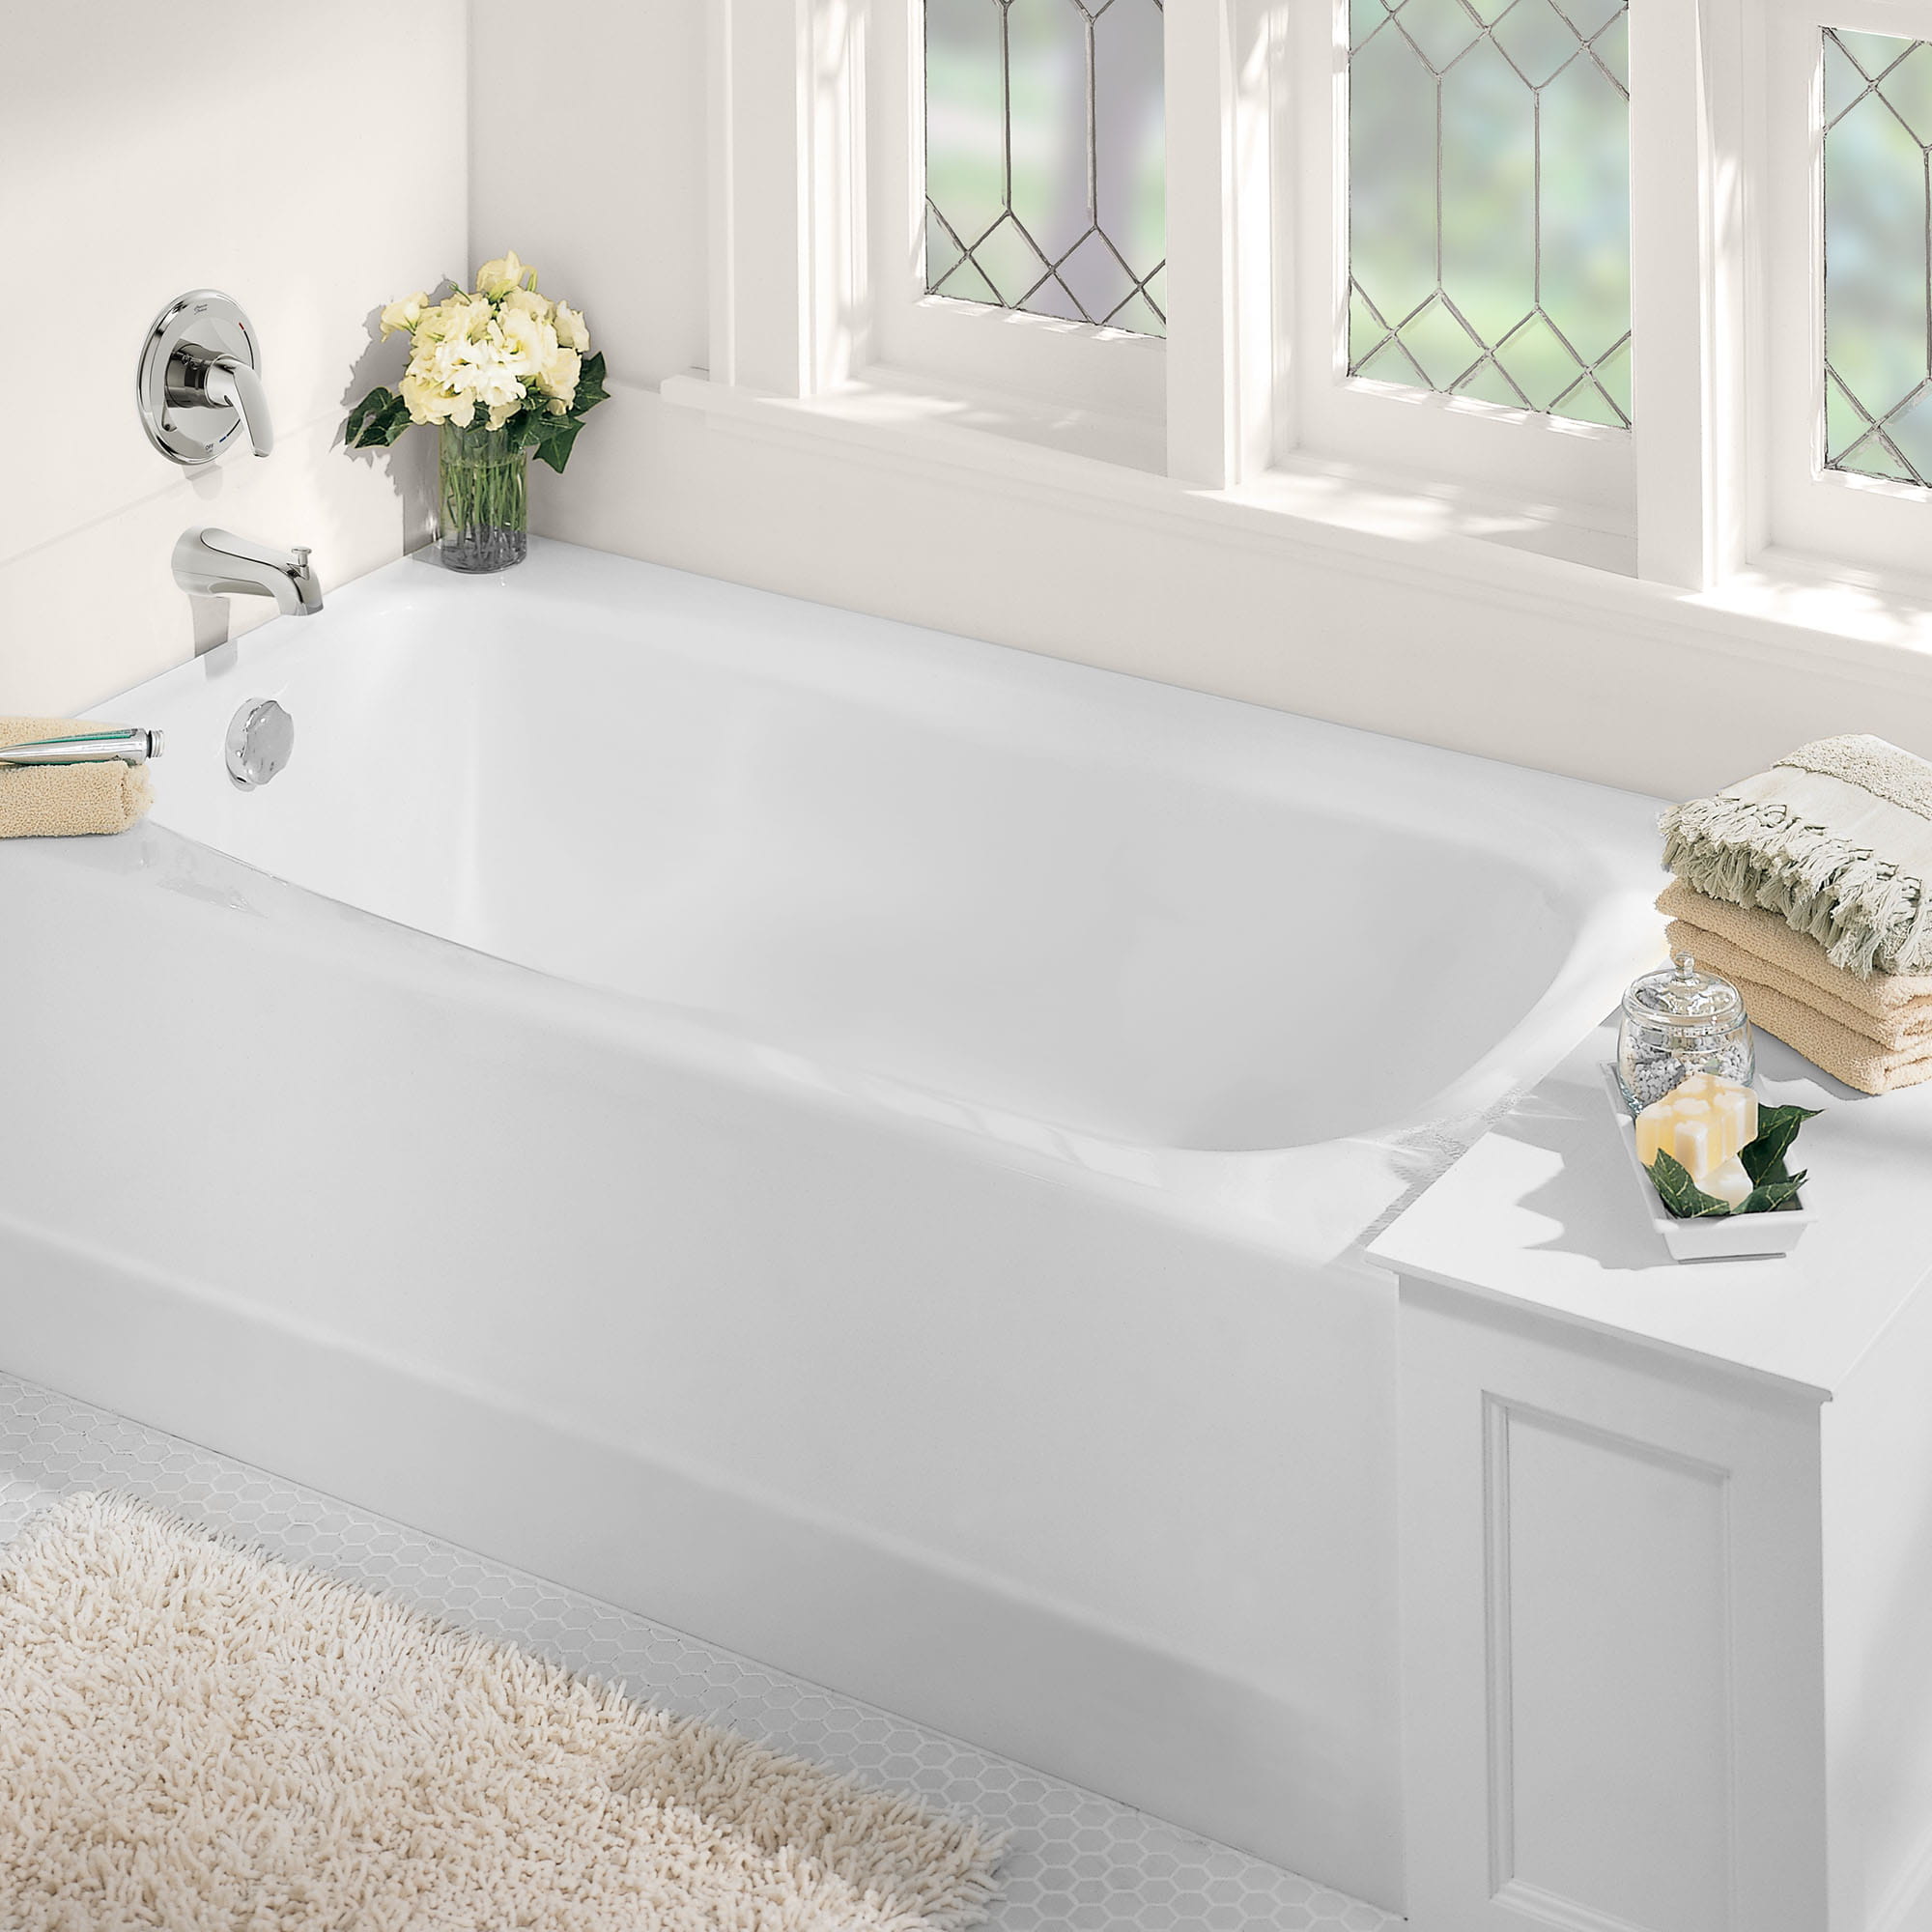 Cambridge Americast 60 x 32 Inch Integral Apron Bathtub With Left Hand Outlet ARCTIC